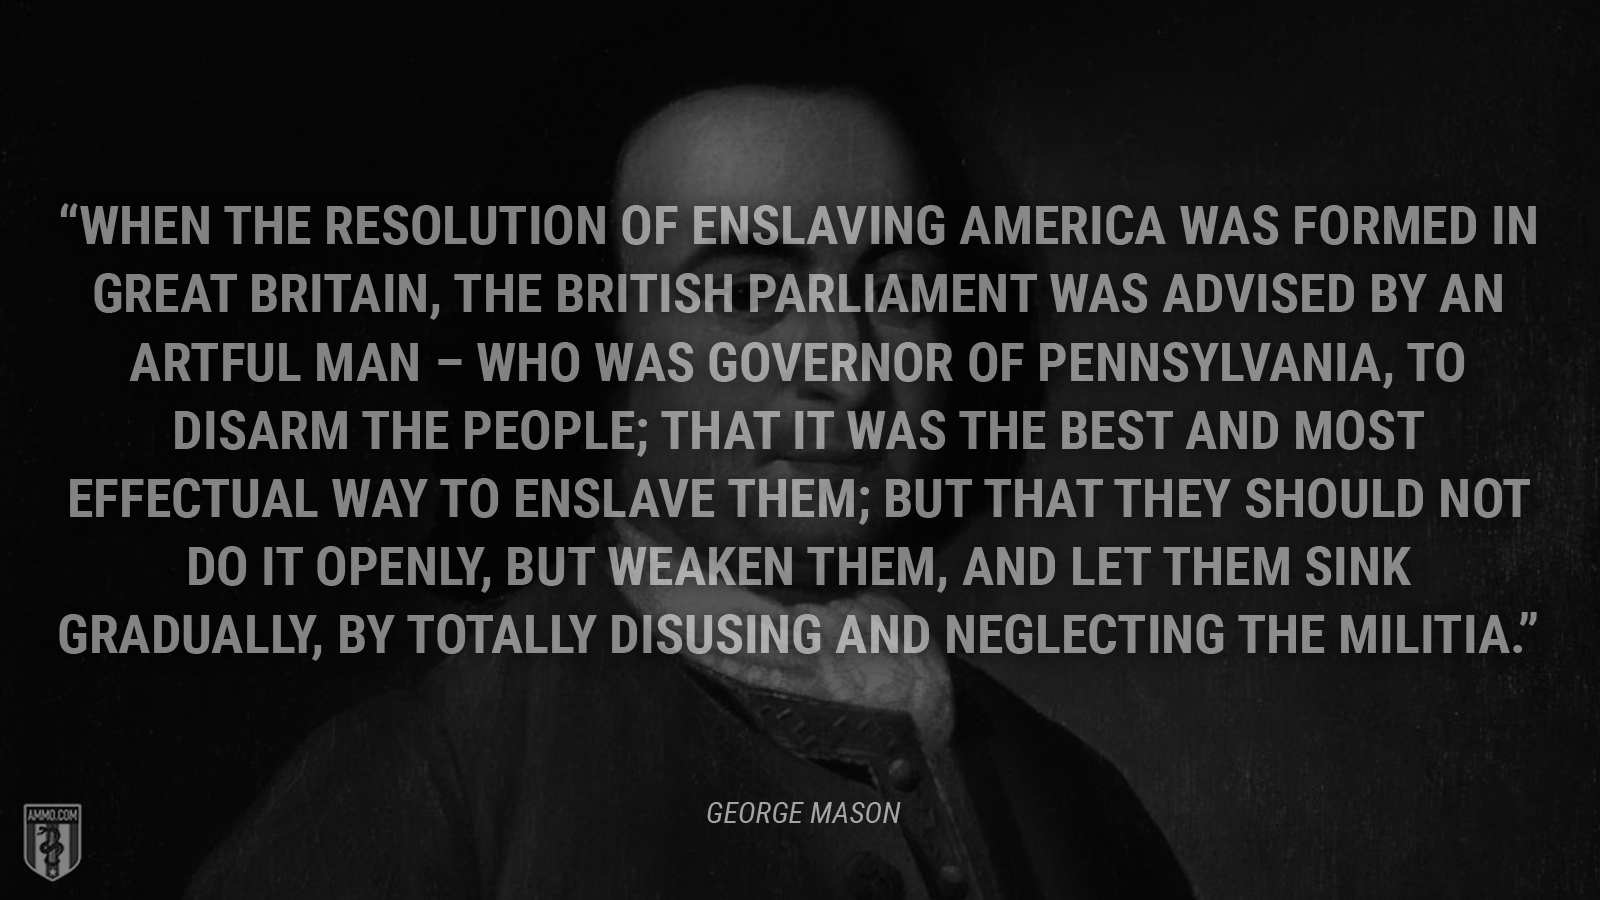 “[W]hen the resolution of enslaving America was formed in Great Britain, the British Parliament was advised by an artful man – who was governor of Pennsylvania, to disarm the people; that it was the best and most effectual way to enslave them; but that they should not do it openly, but weaken them, and let them sink gradually, by totally disusing and neglecting the militia.” - George Mason